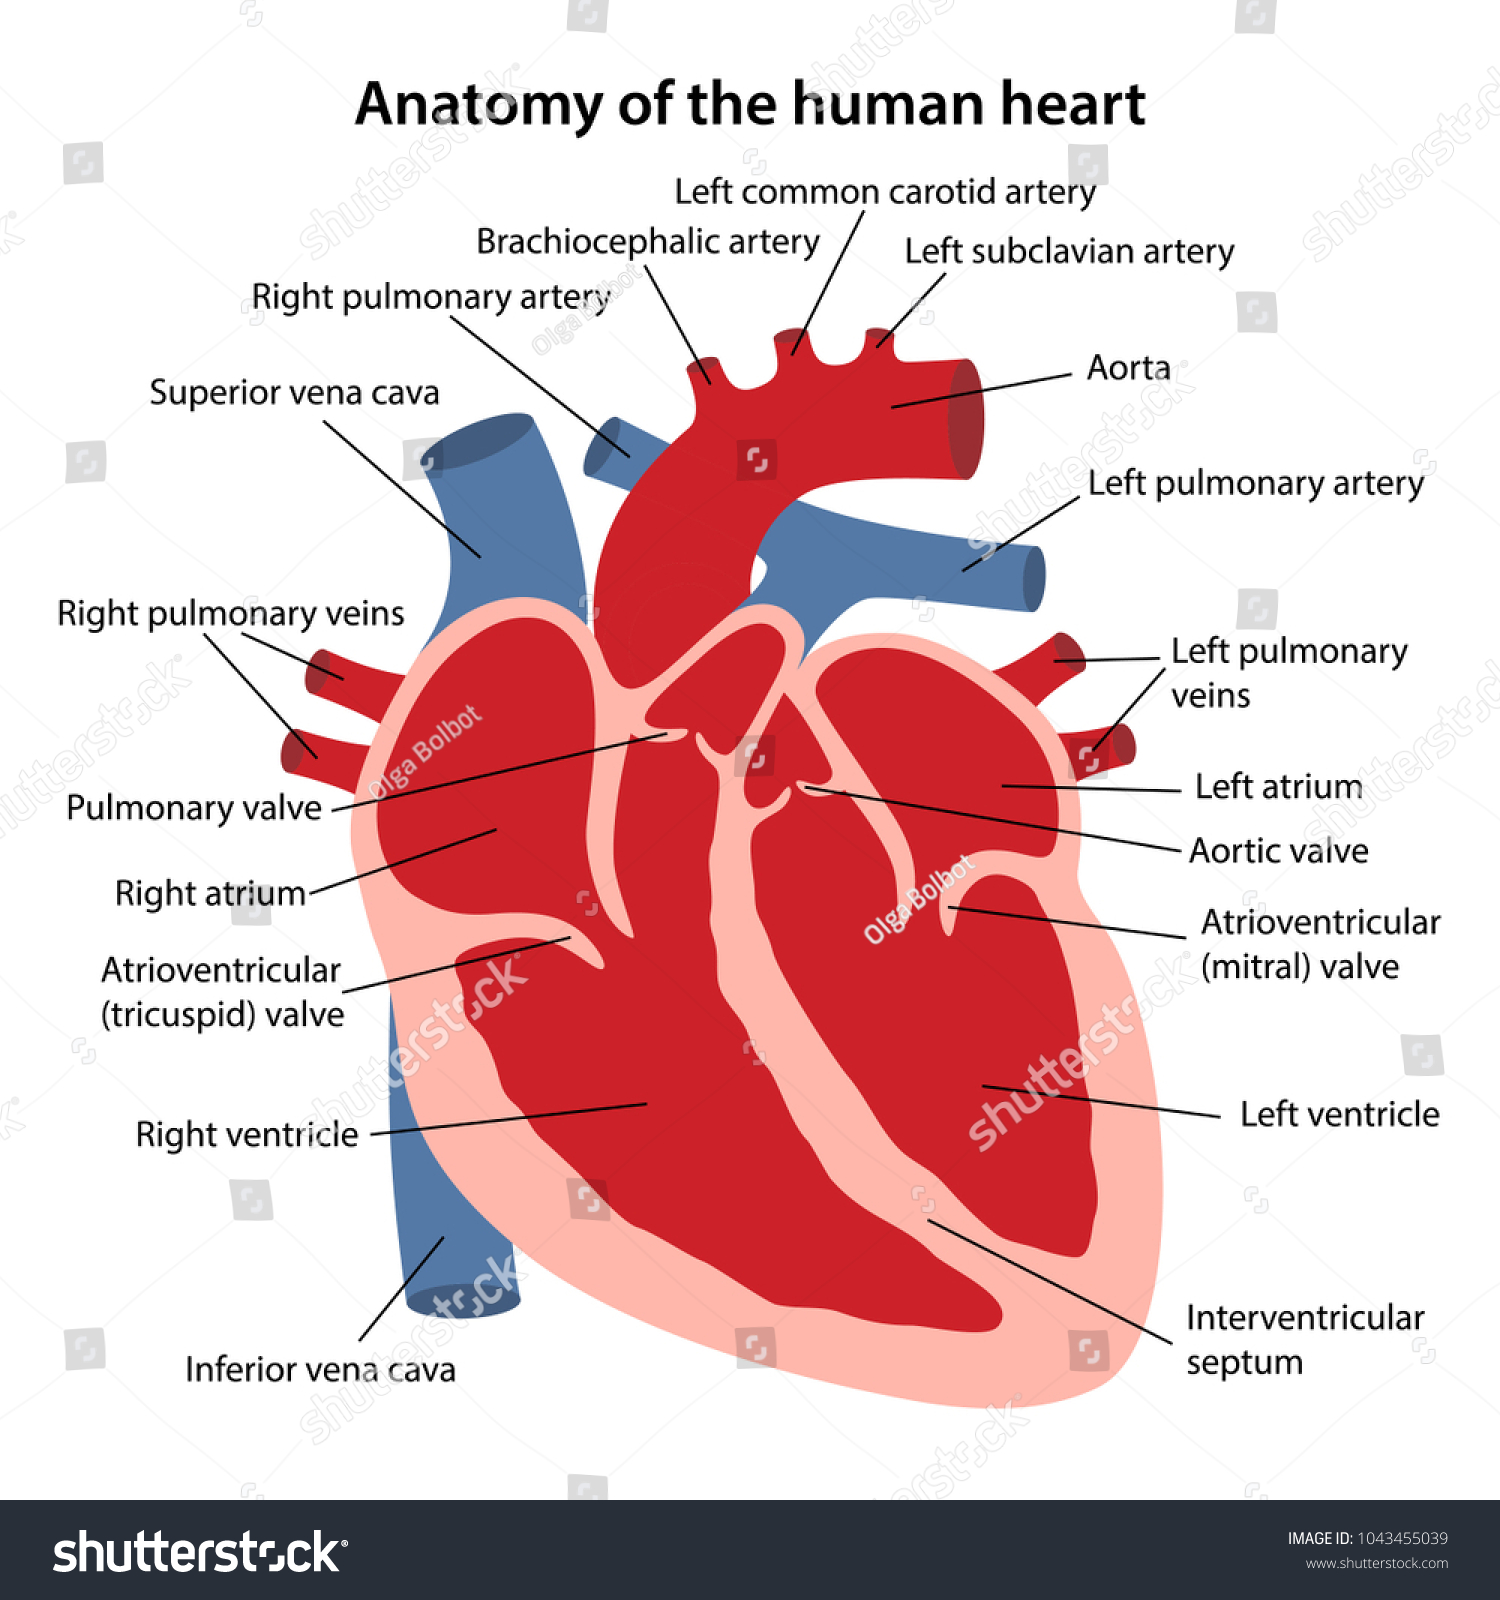 Heart Anatomy Diagram Labeled | World of Reference